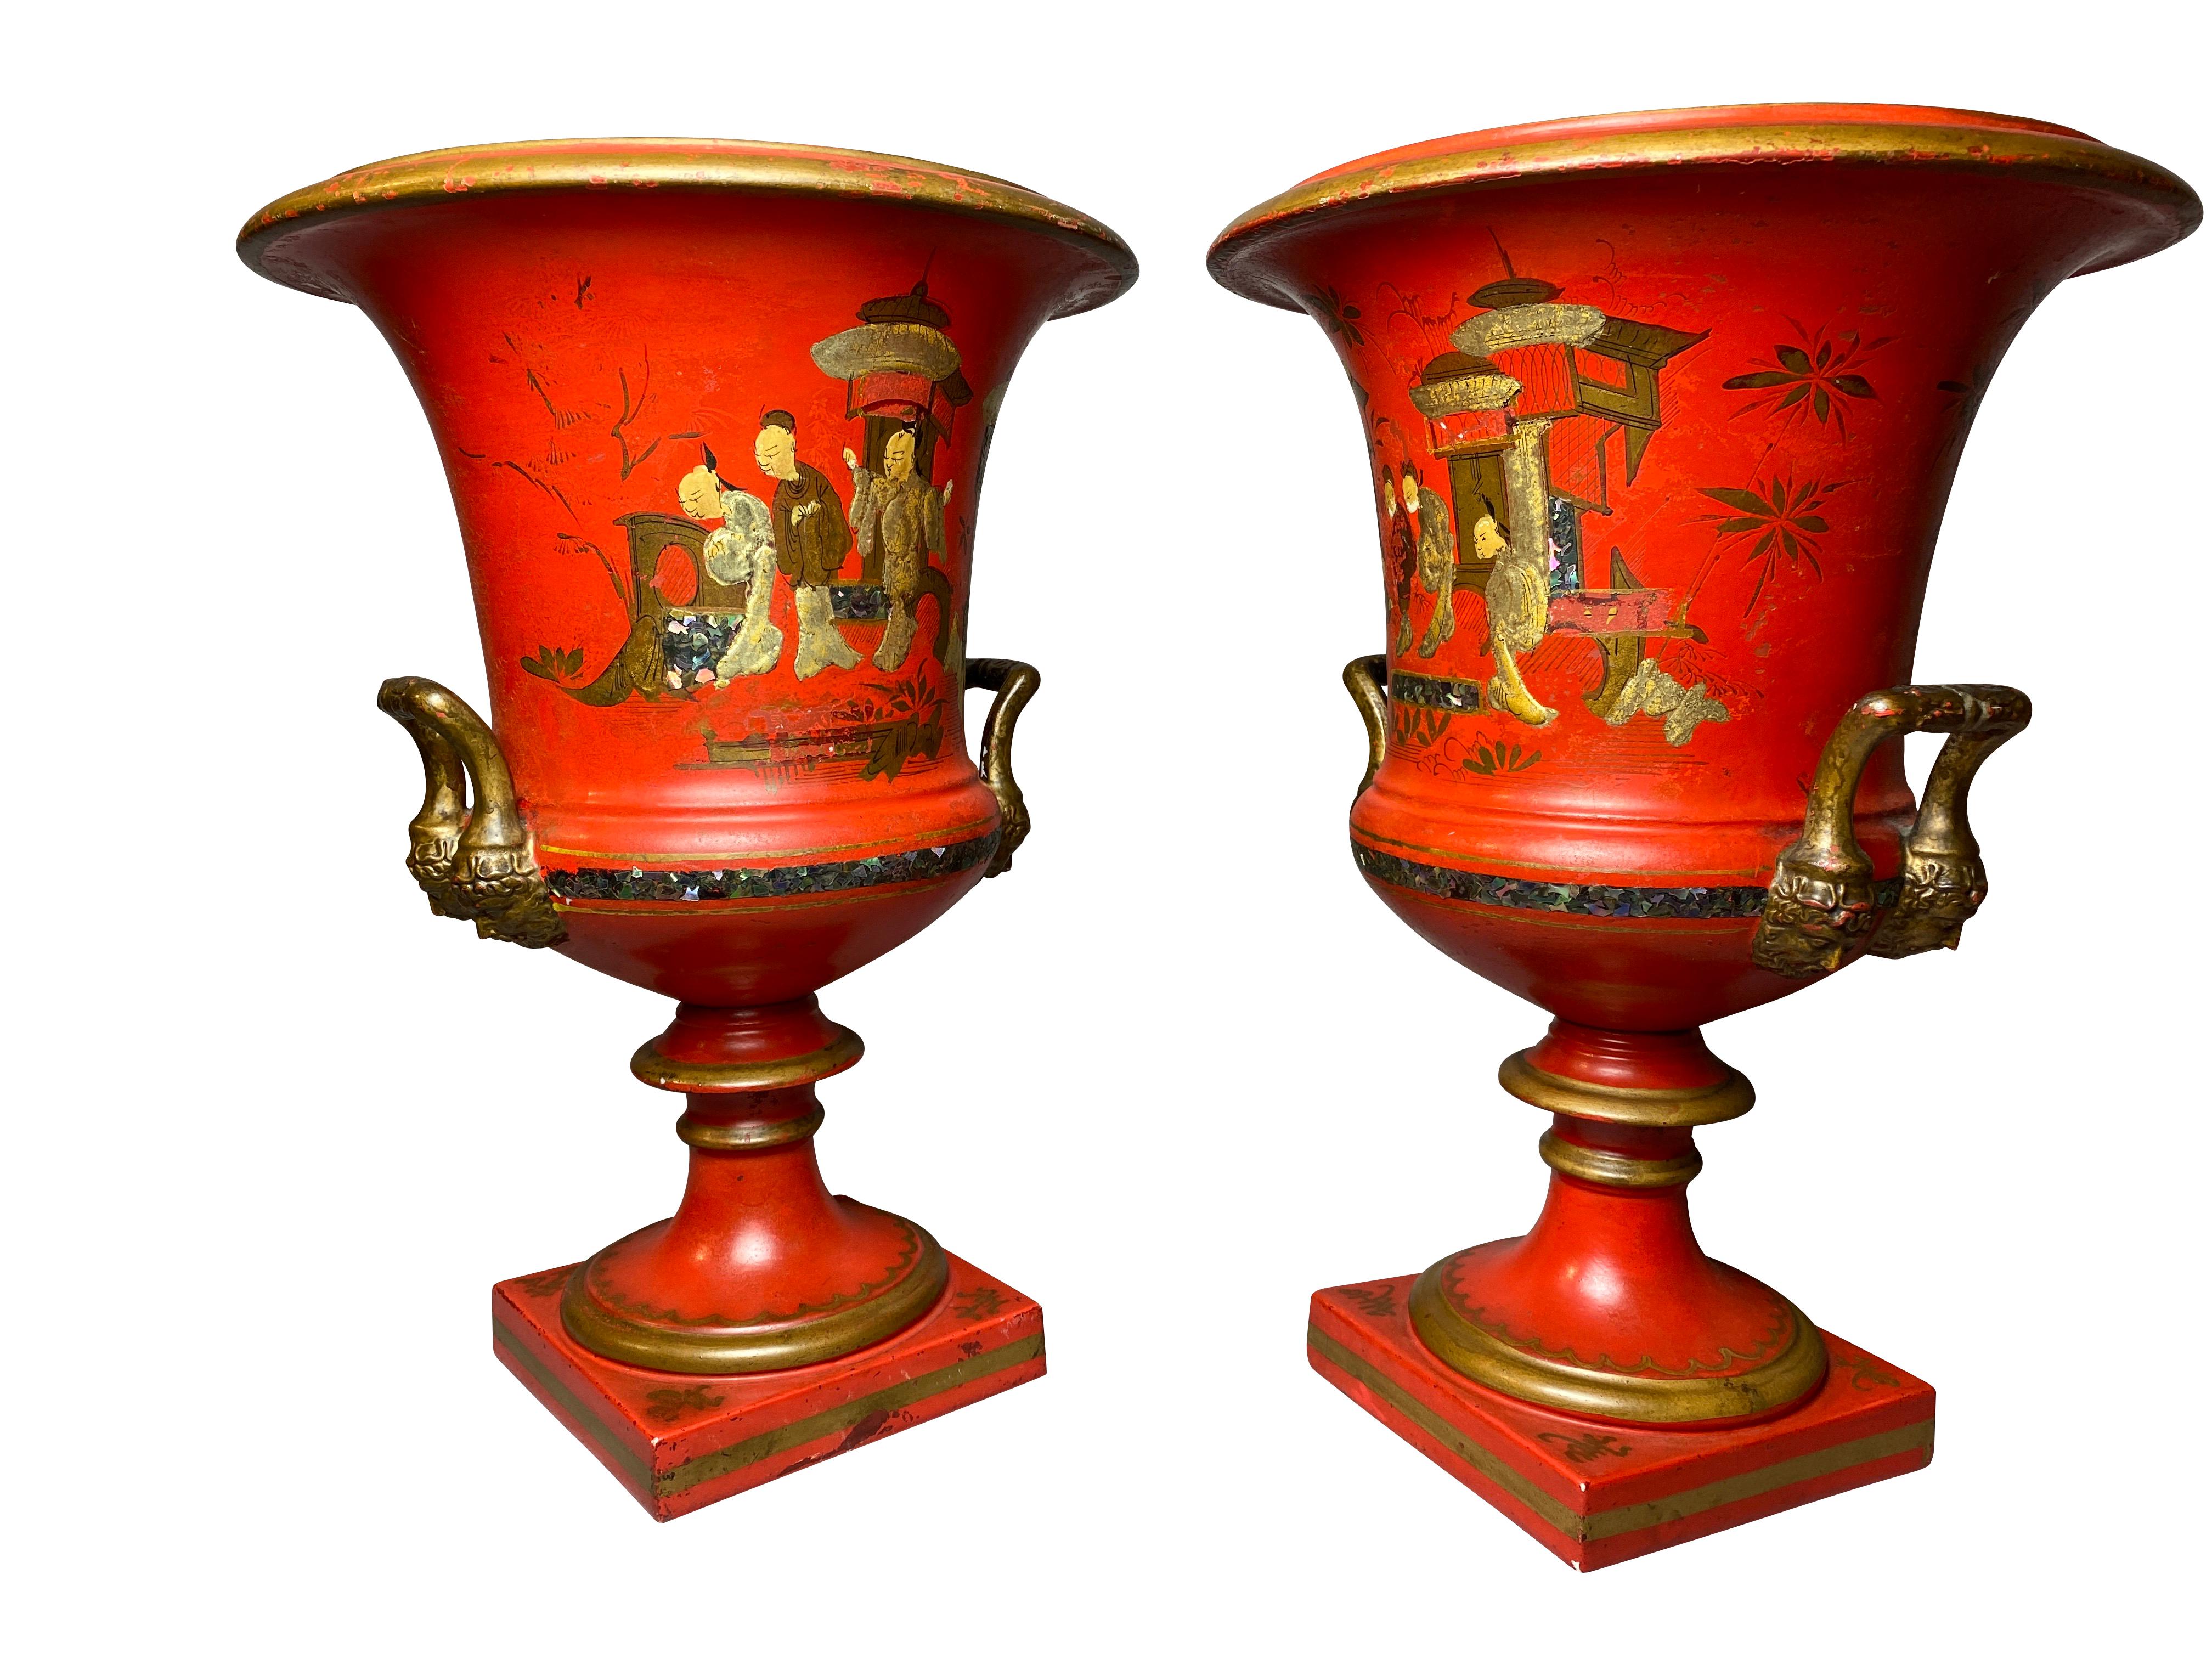 Flared urn shape with gilded handles with head terminals decorated later with scarlet red and painted and gilt figures and landscapes. Ex Mallett Antiques, London. Purchased in the 1970s.